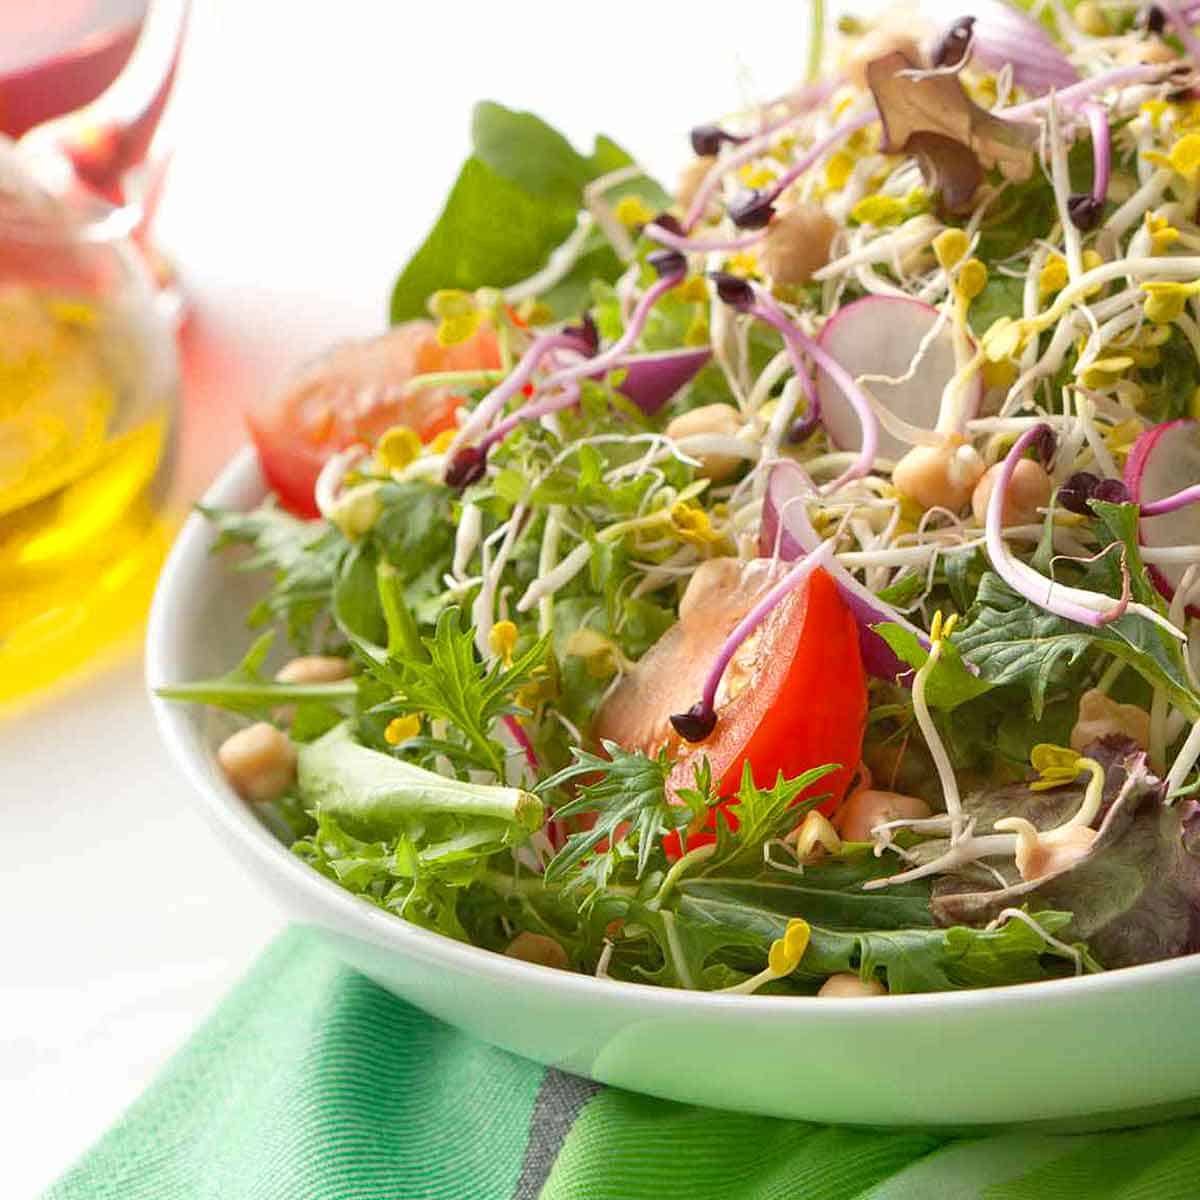 A fresh green salad topped with sprouts.